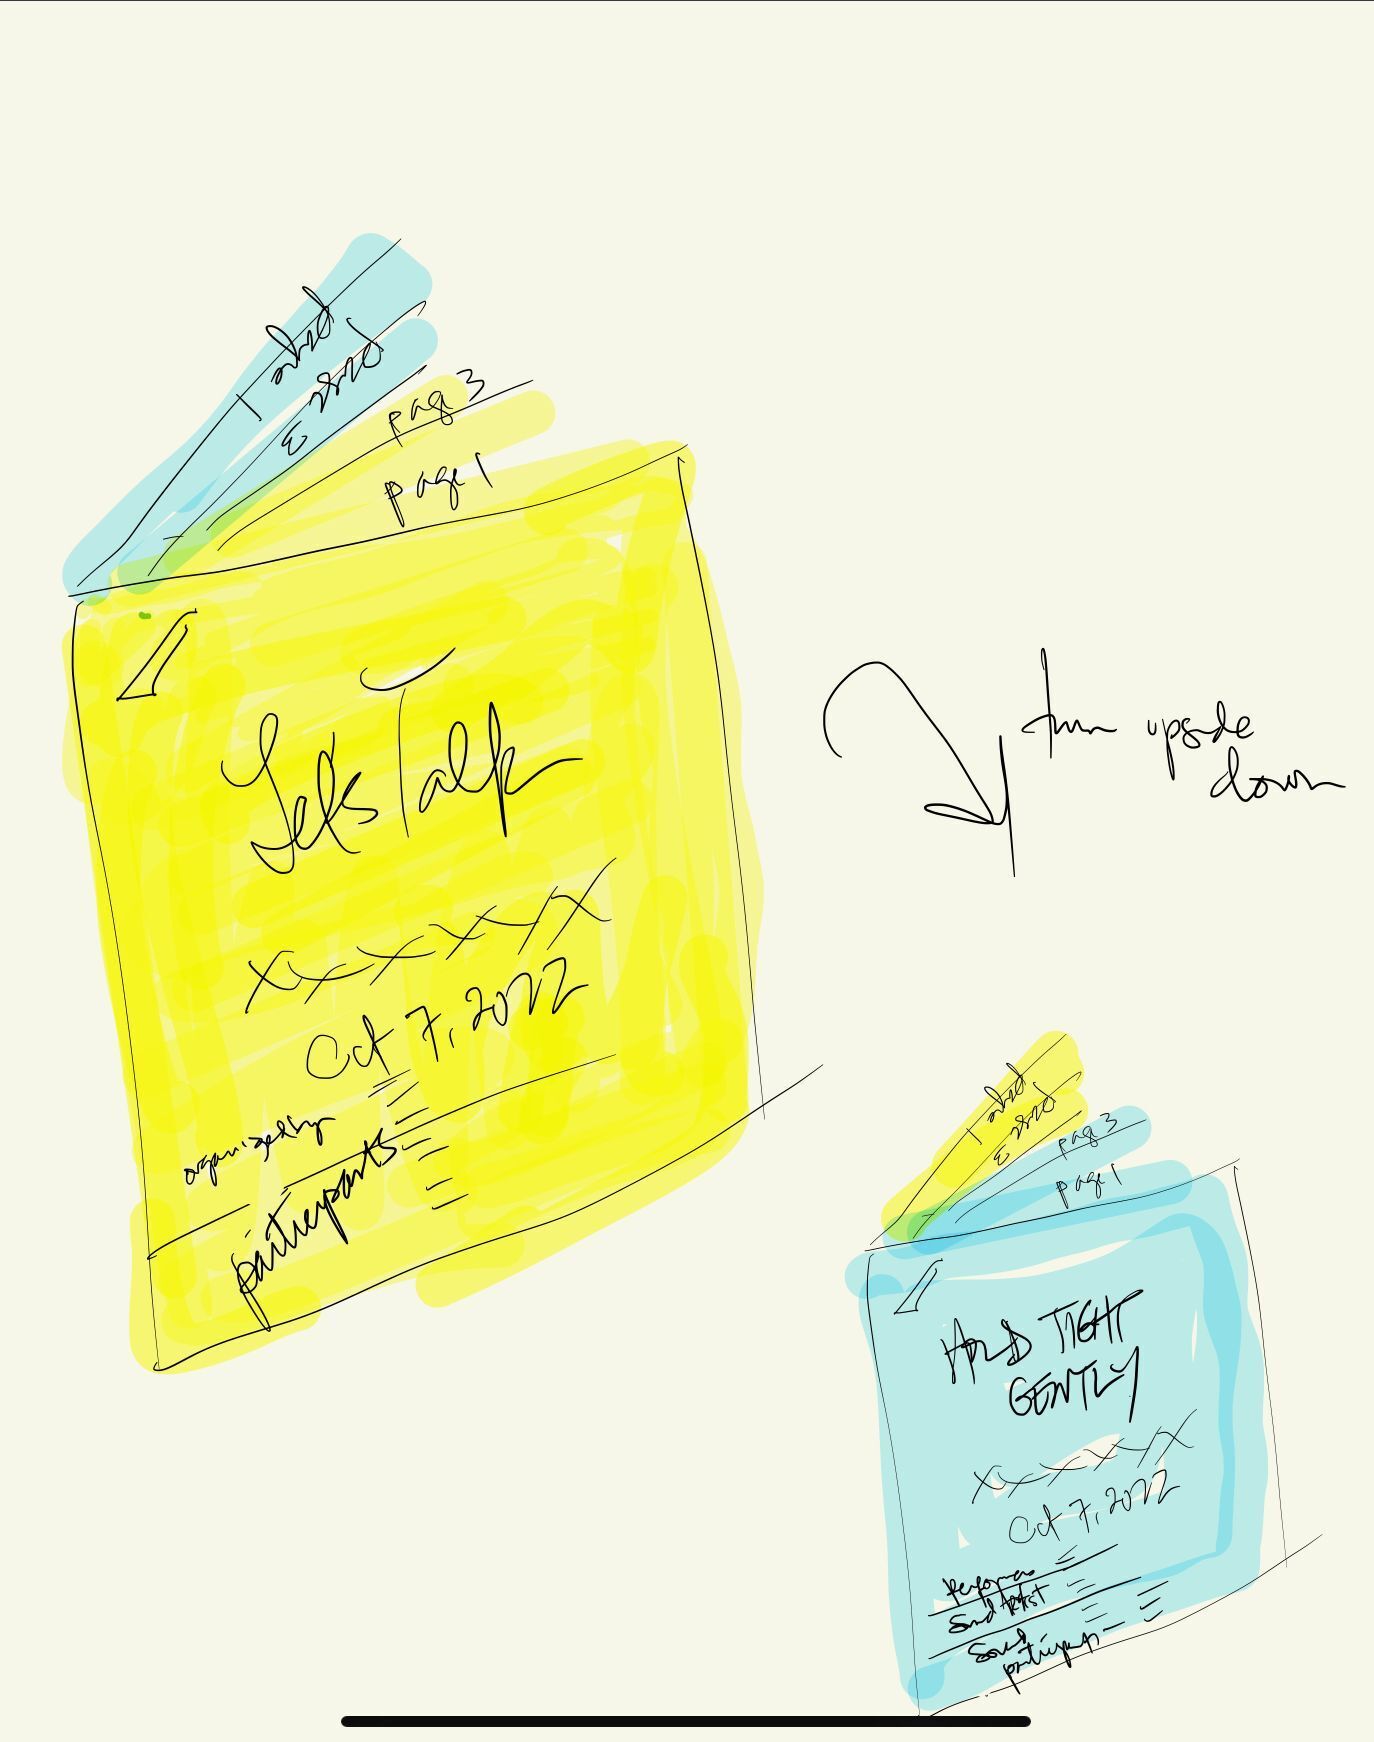 yellow and blue program sketch from artist Julie Tolentino